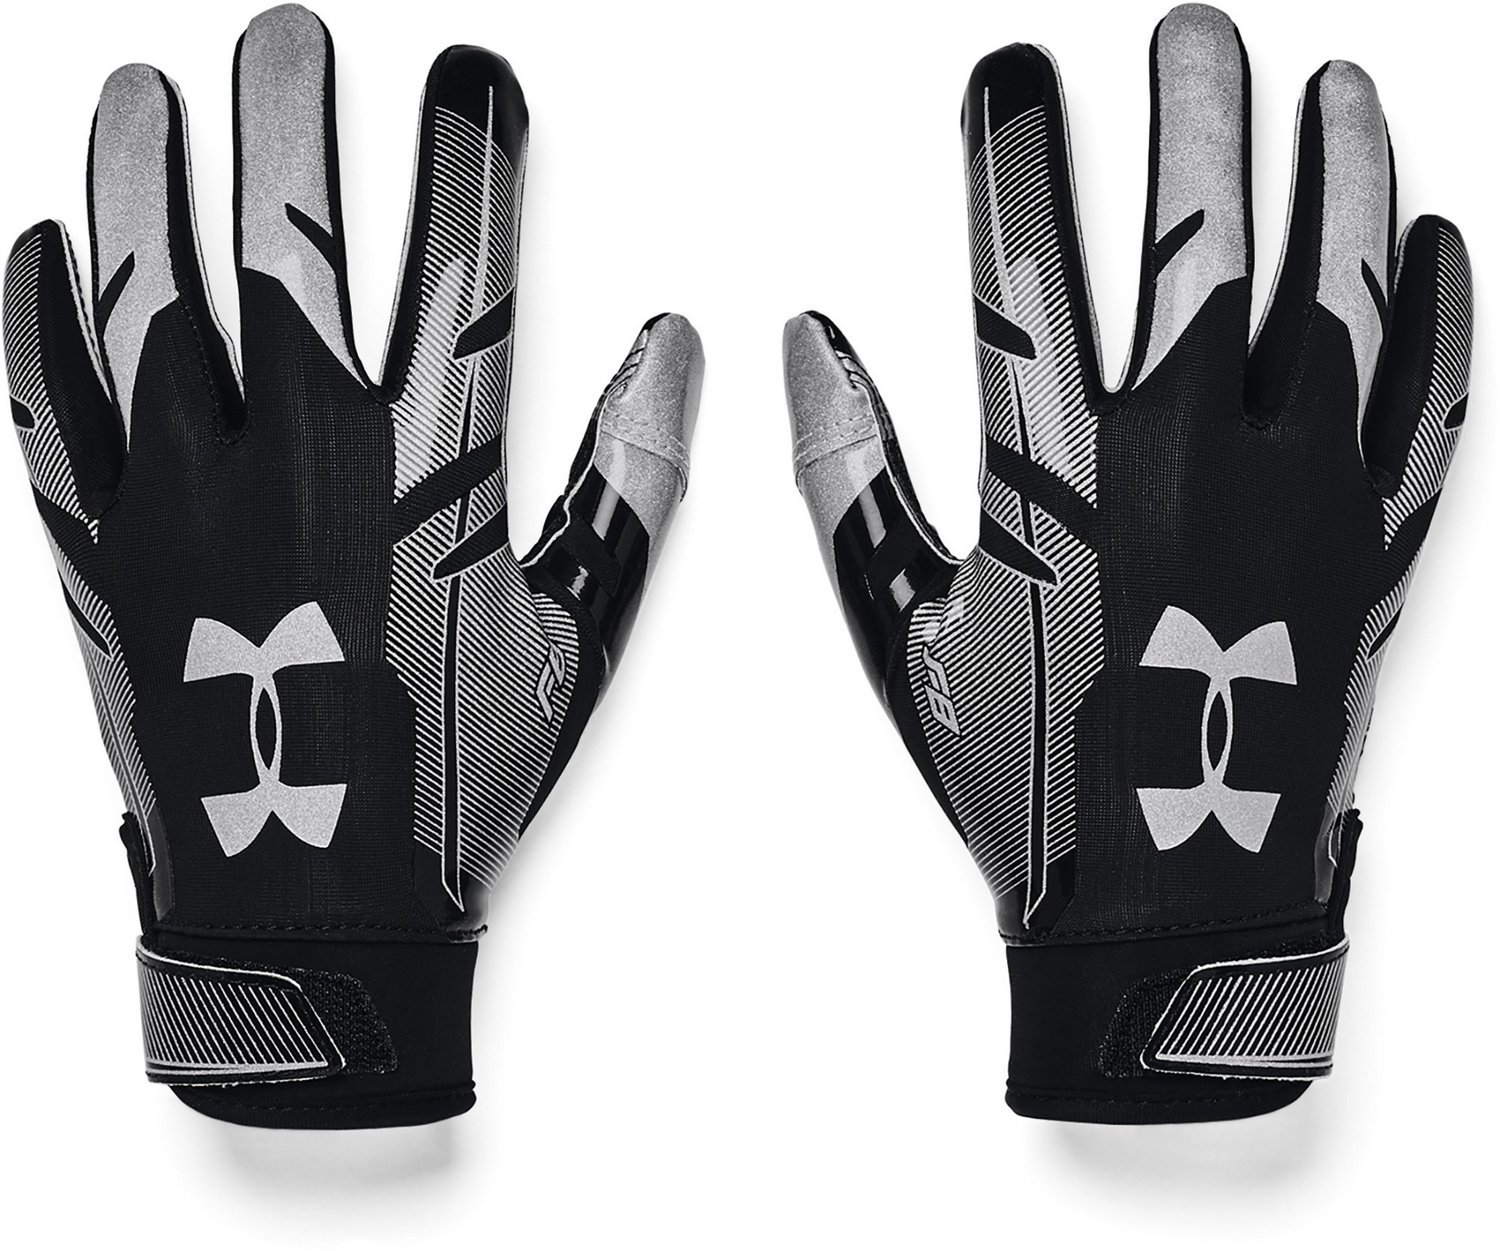 Under Armour Kids Pee Wee F8 Football Gloves